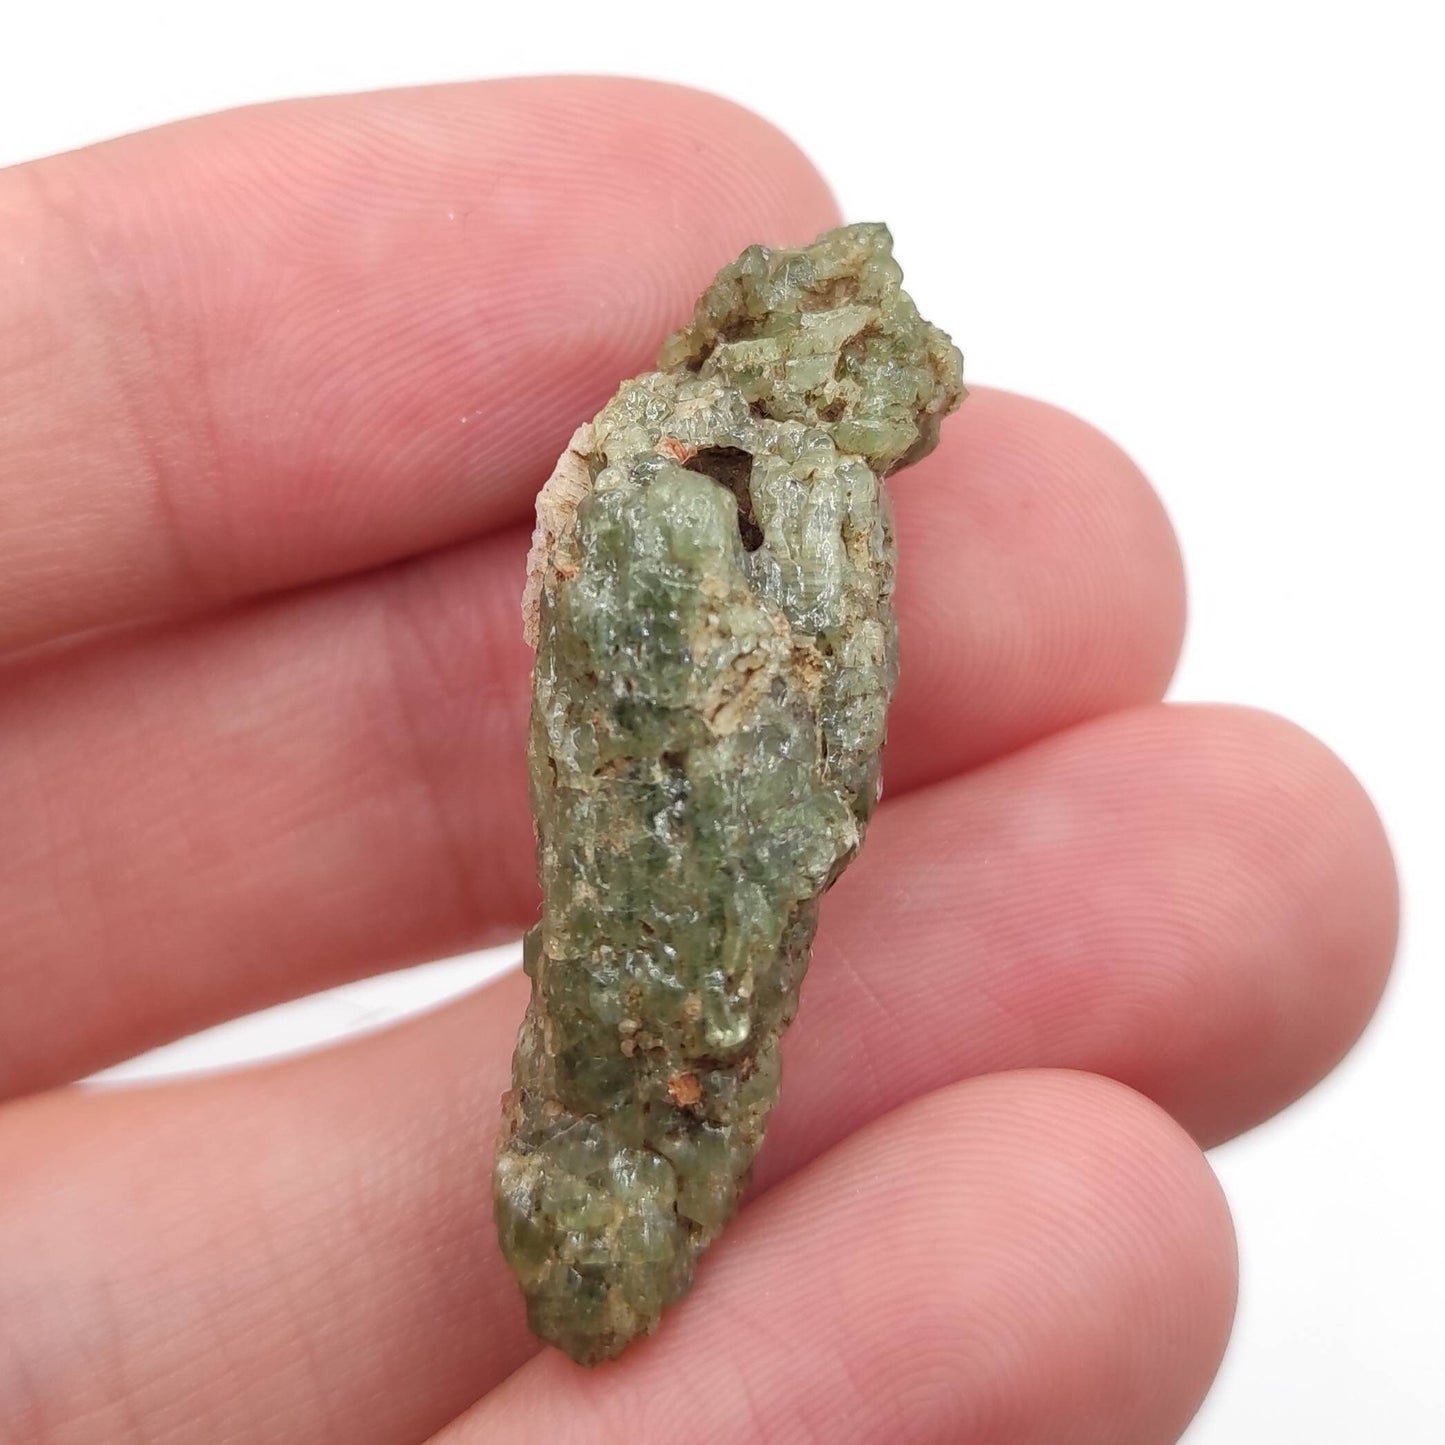 32ct Mini Diopside Crystal Specimen from Haliburton County, Canada - Natural Green Diopside Mineral - Rough Diopside Crystal - Canadian Gems